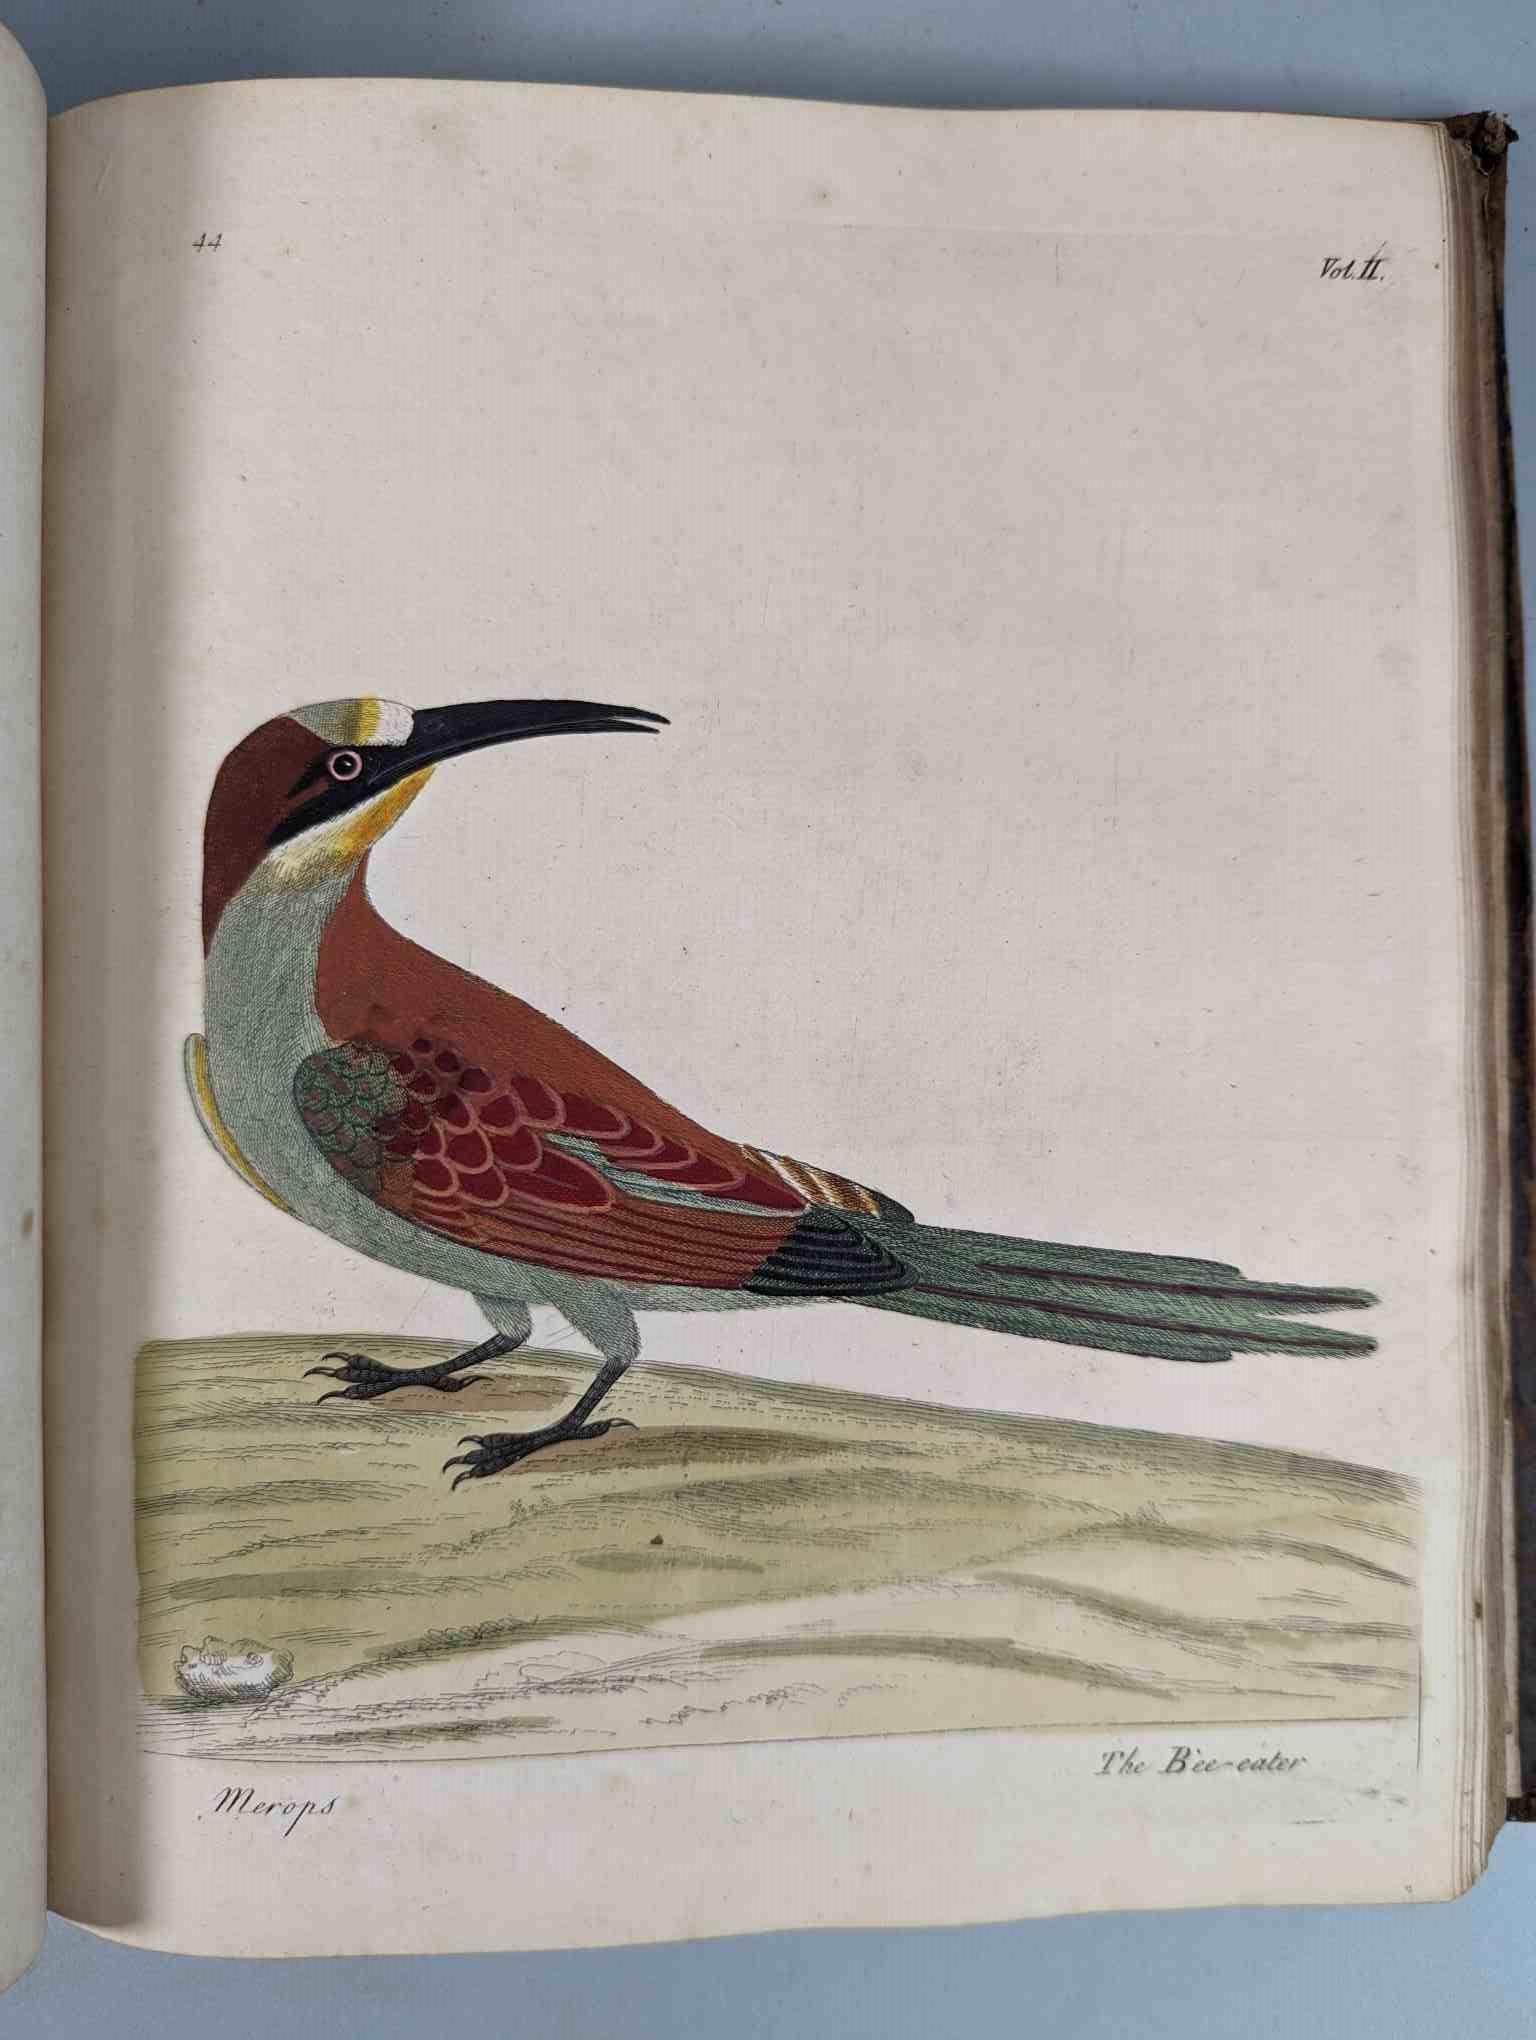 ALBIN, Eleazar. A Natural History of Birds, to which are added, Notes and Observations by W. - Image 148 of 208